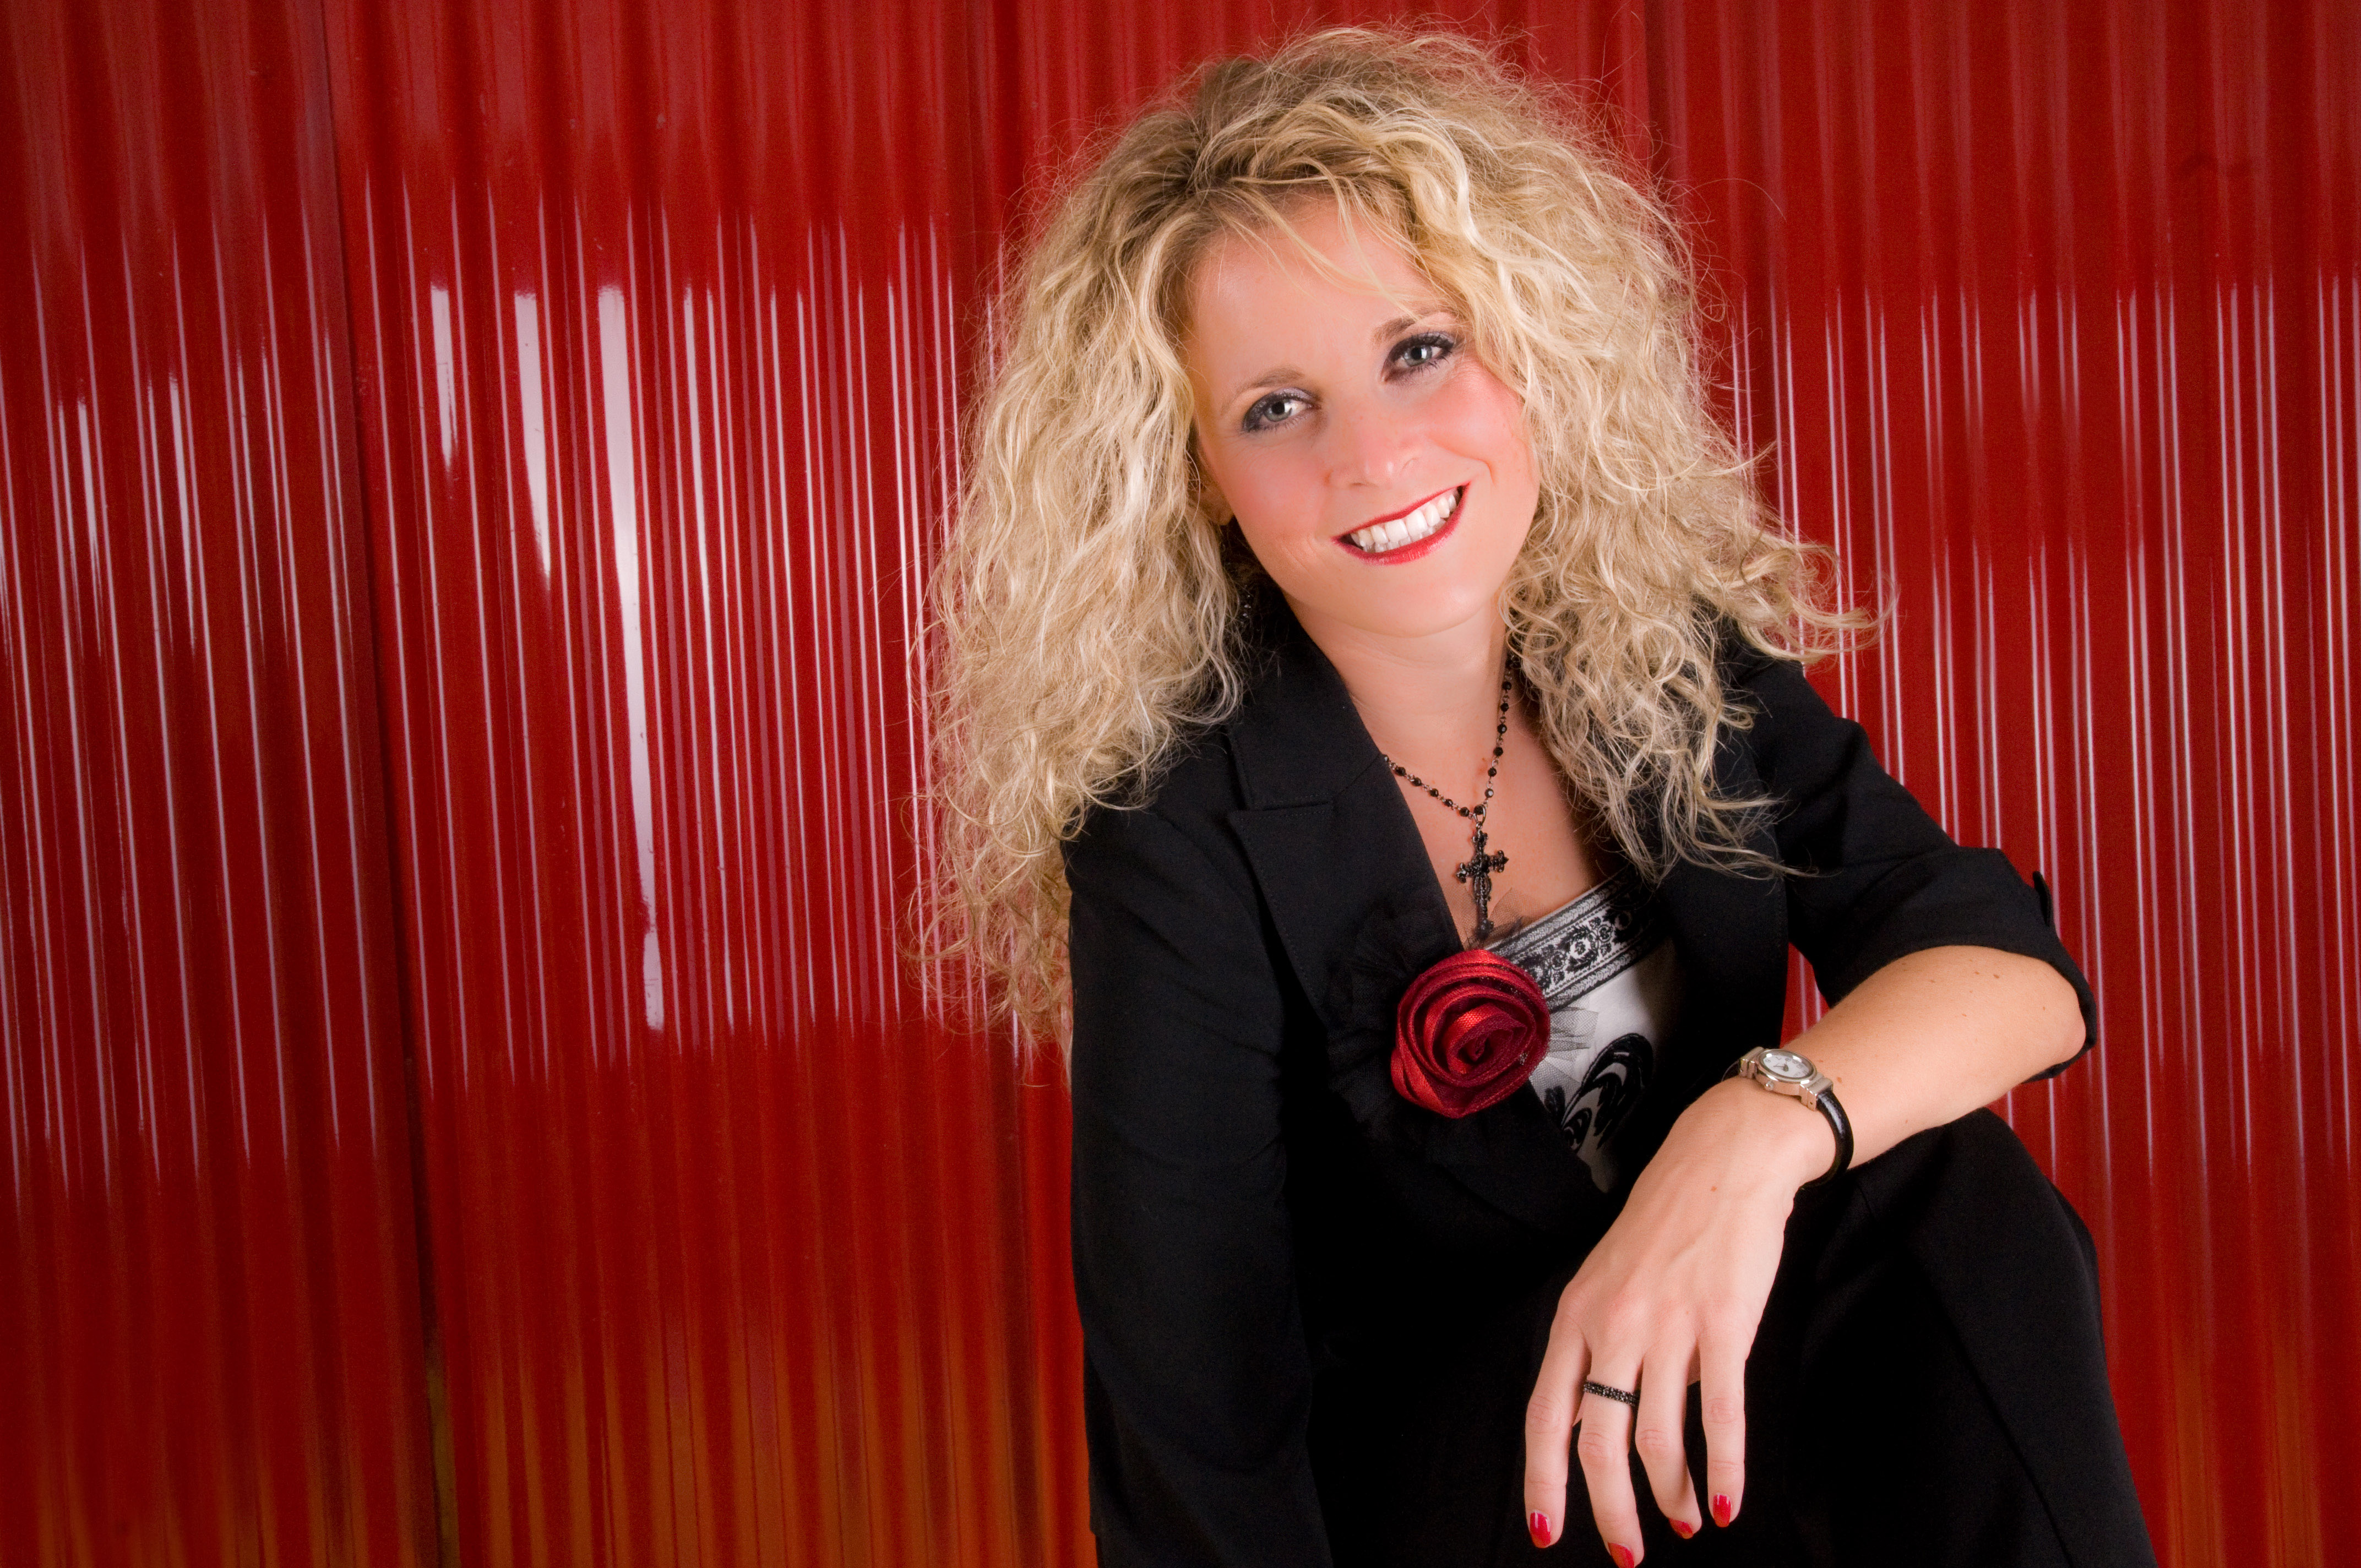 LINDSEY GRAHAM: Singing Praises with Passion - Southern Gospel Music News